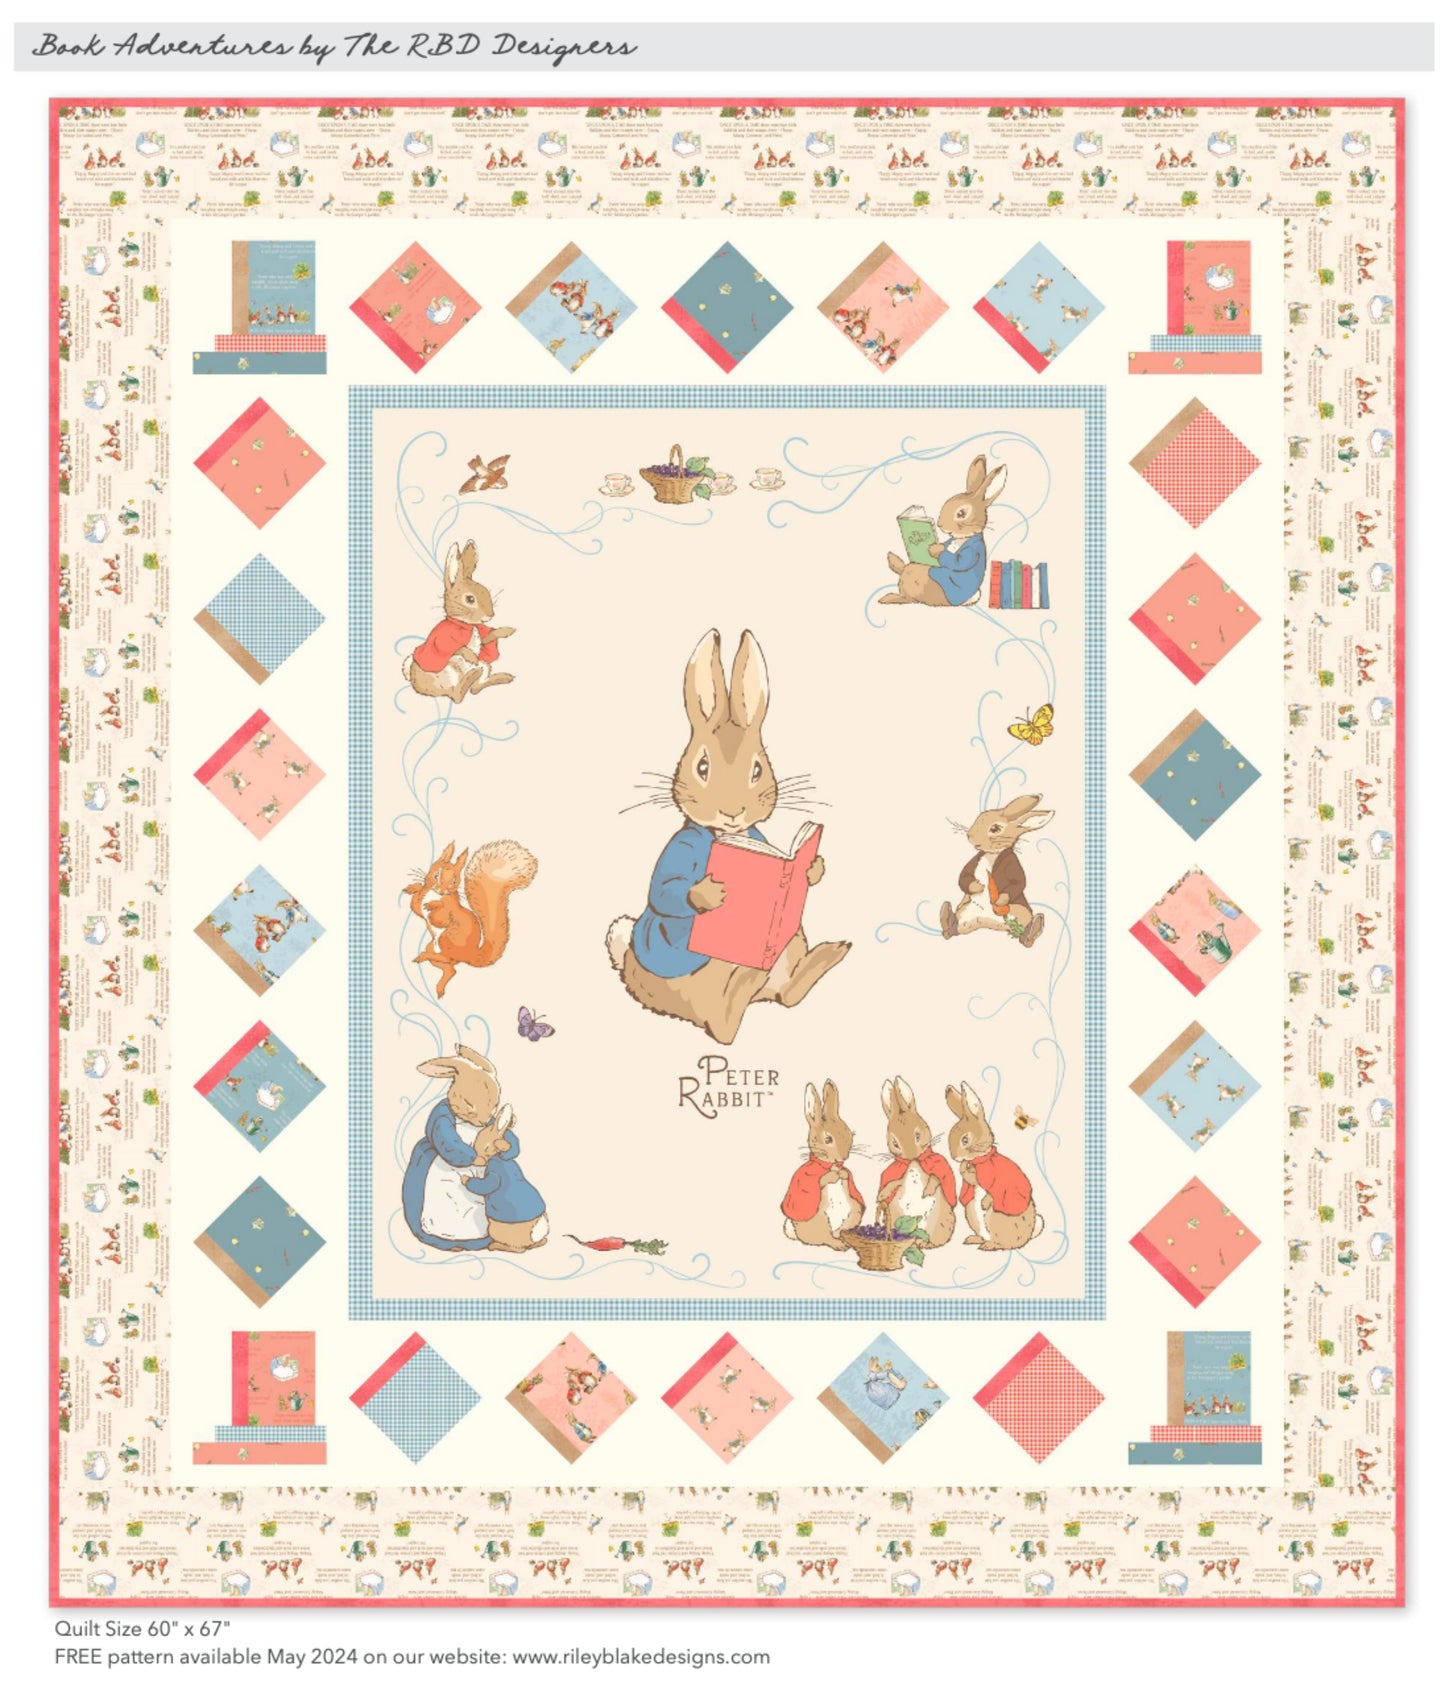 The Tale of Peter Rabbit - The Book Adventures Quilt Boxed Kit - Riley Blake Designs